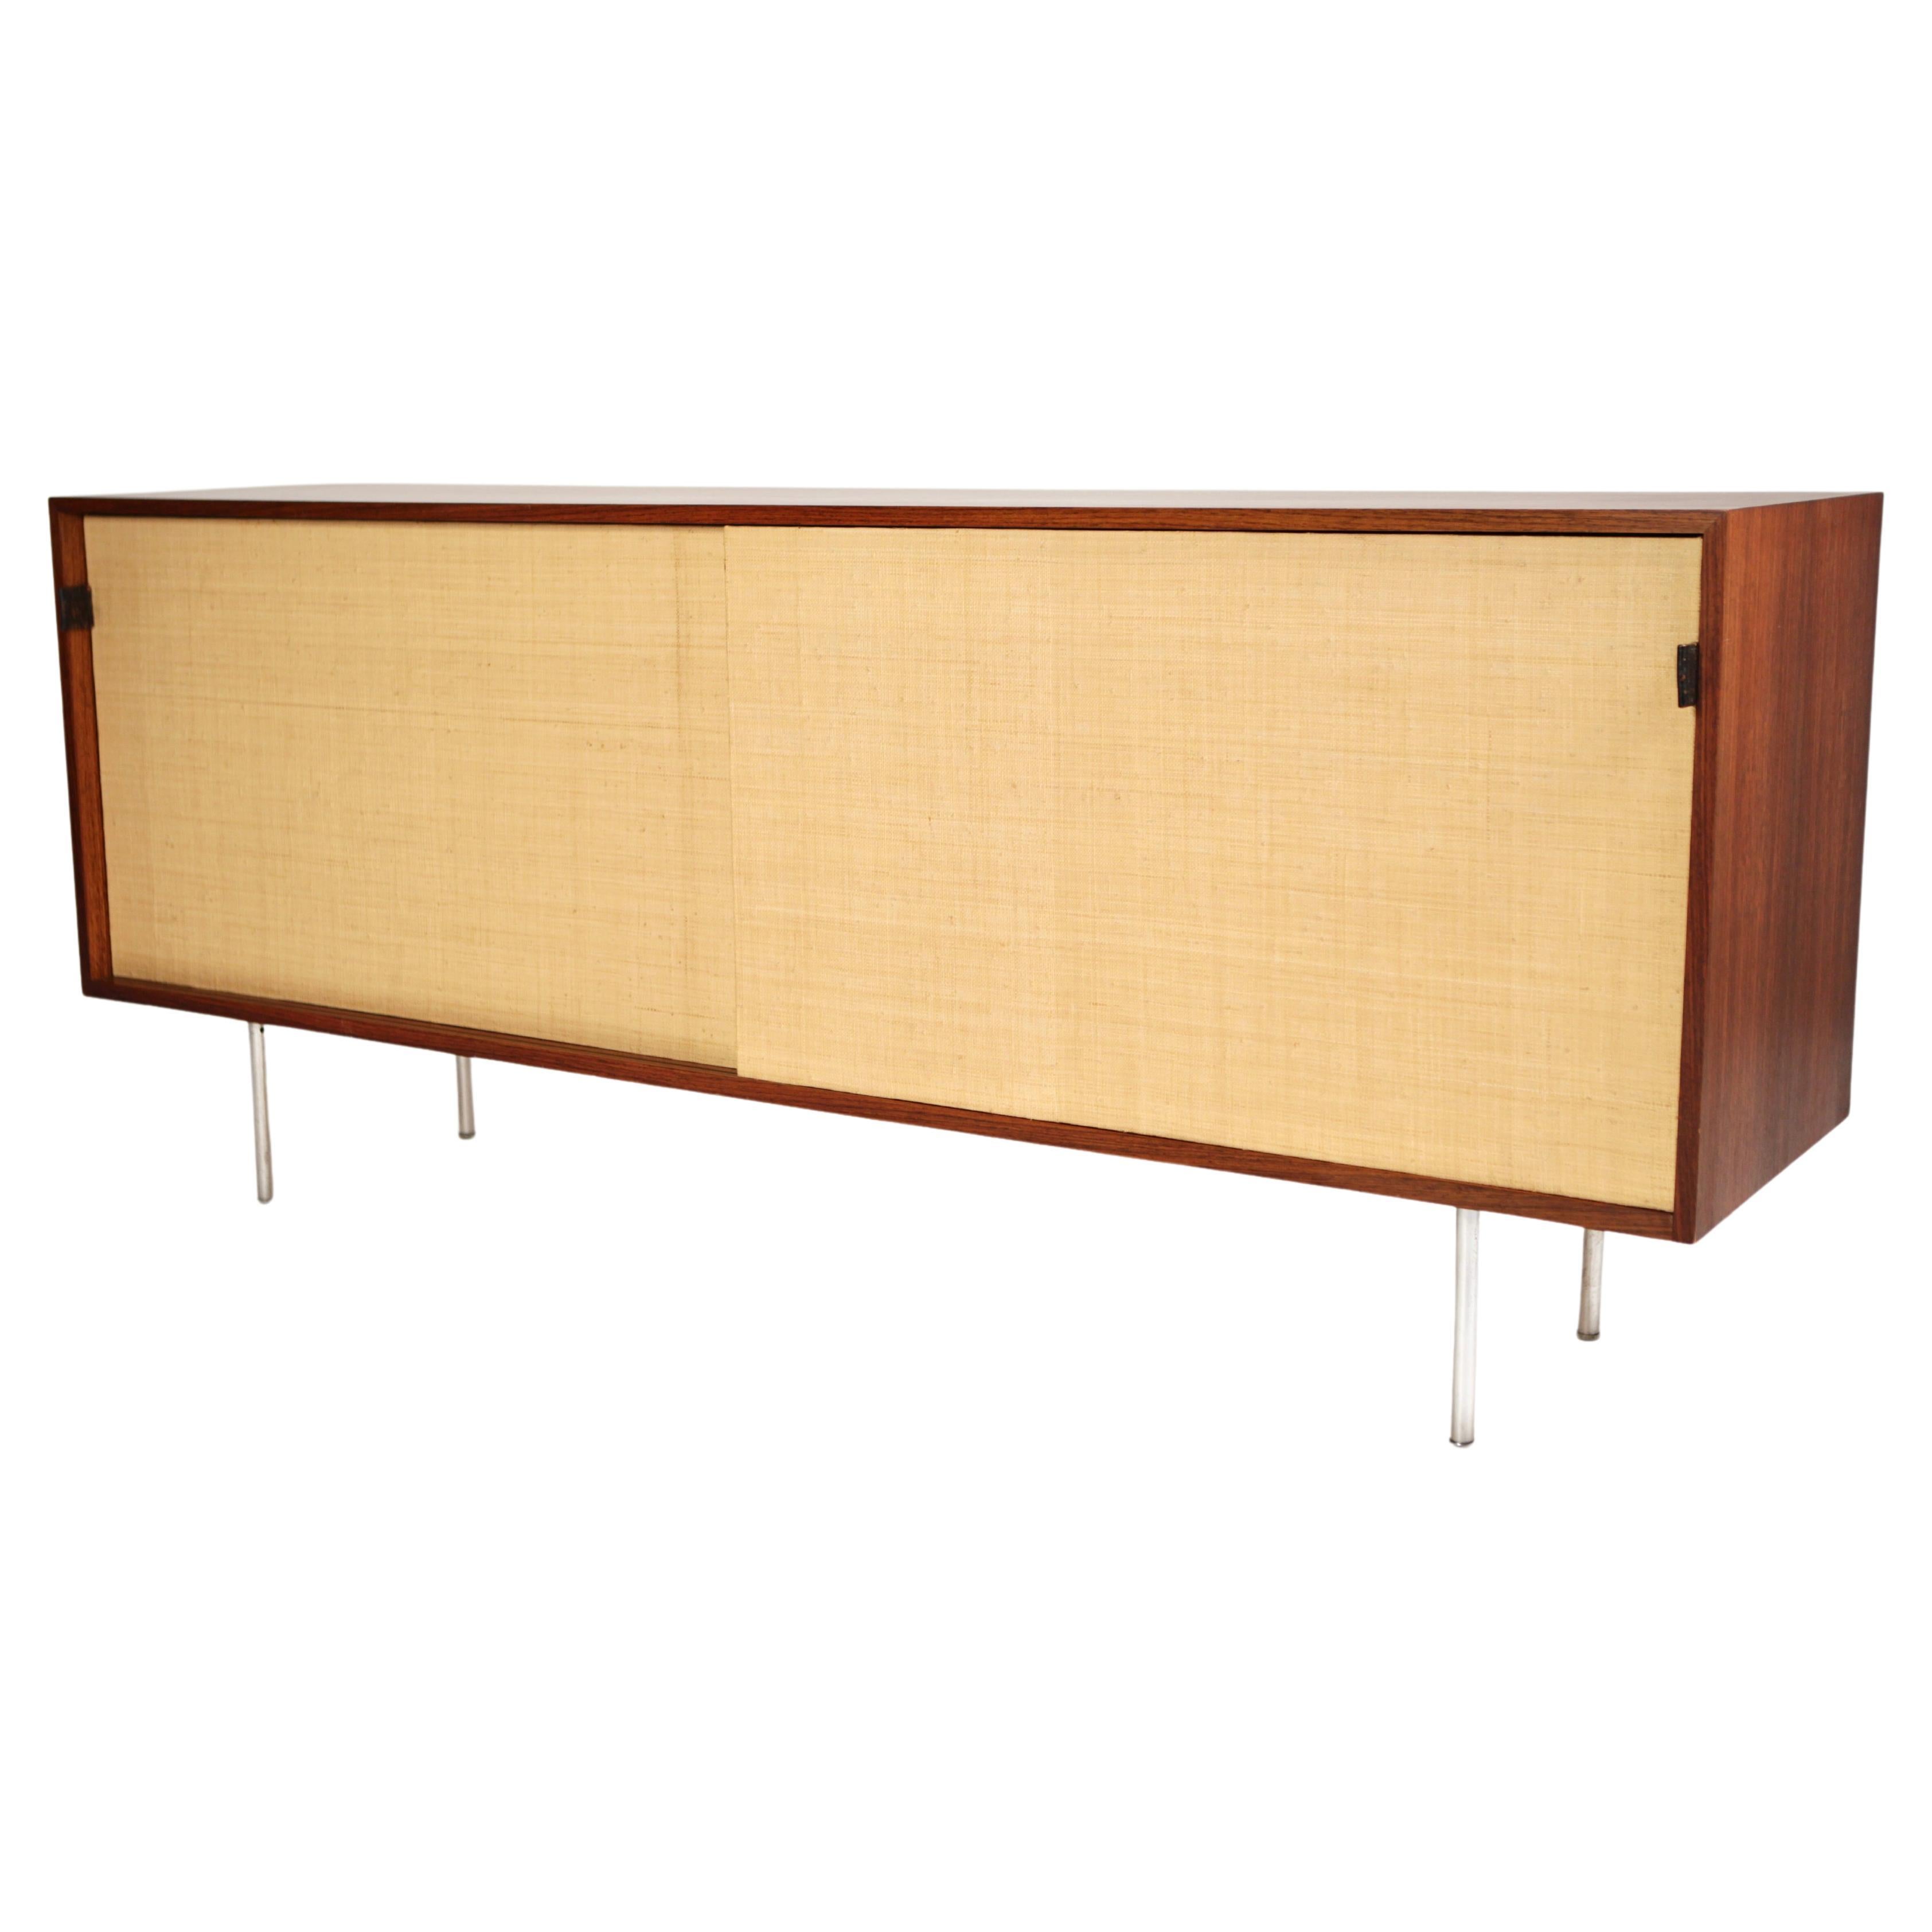 Sideboard in East Indian Rosewood & Seagrass by Florence Knoll, Designed 1947